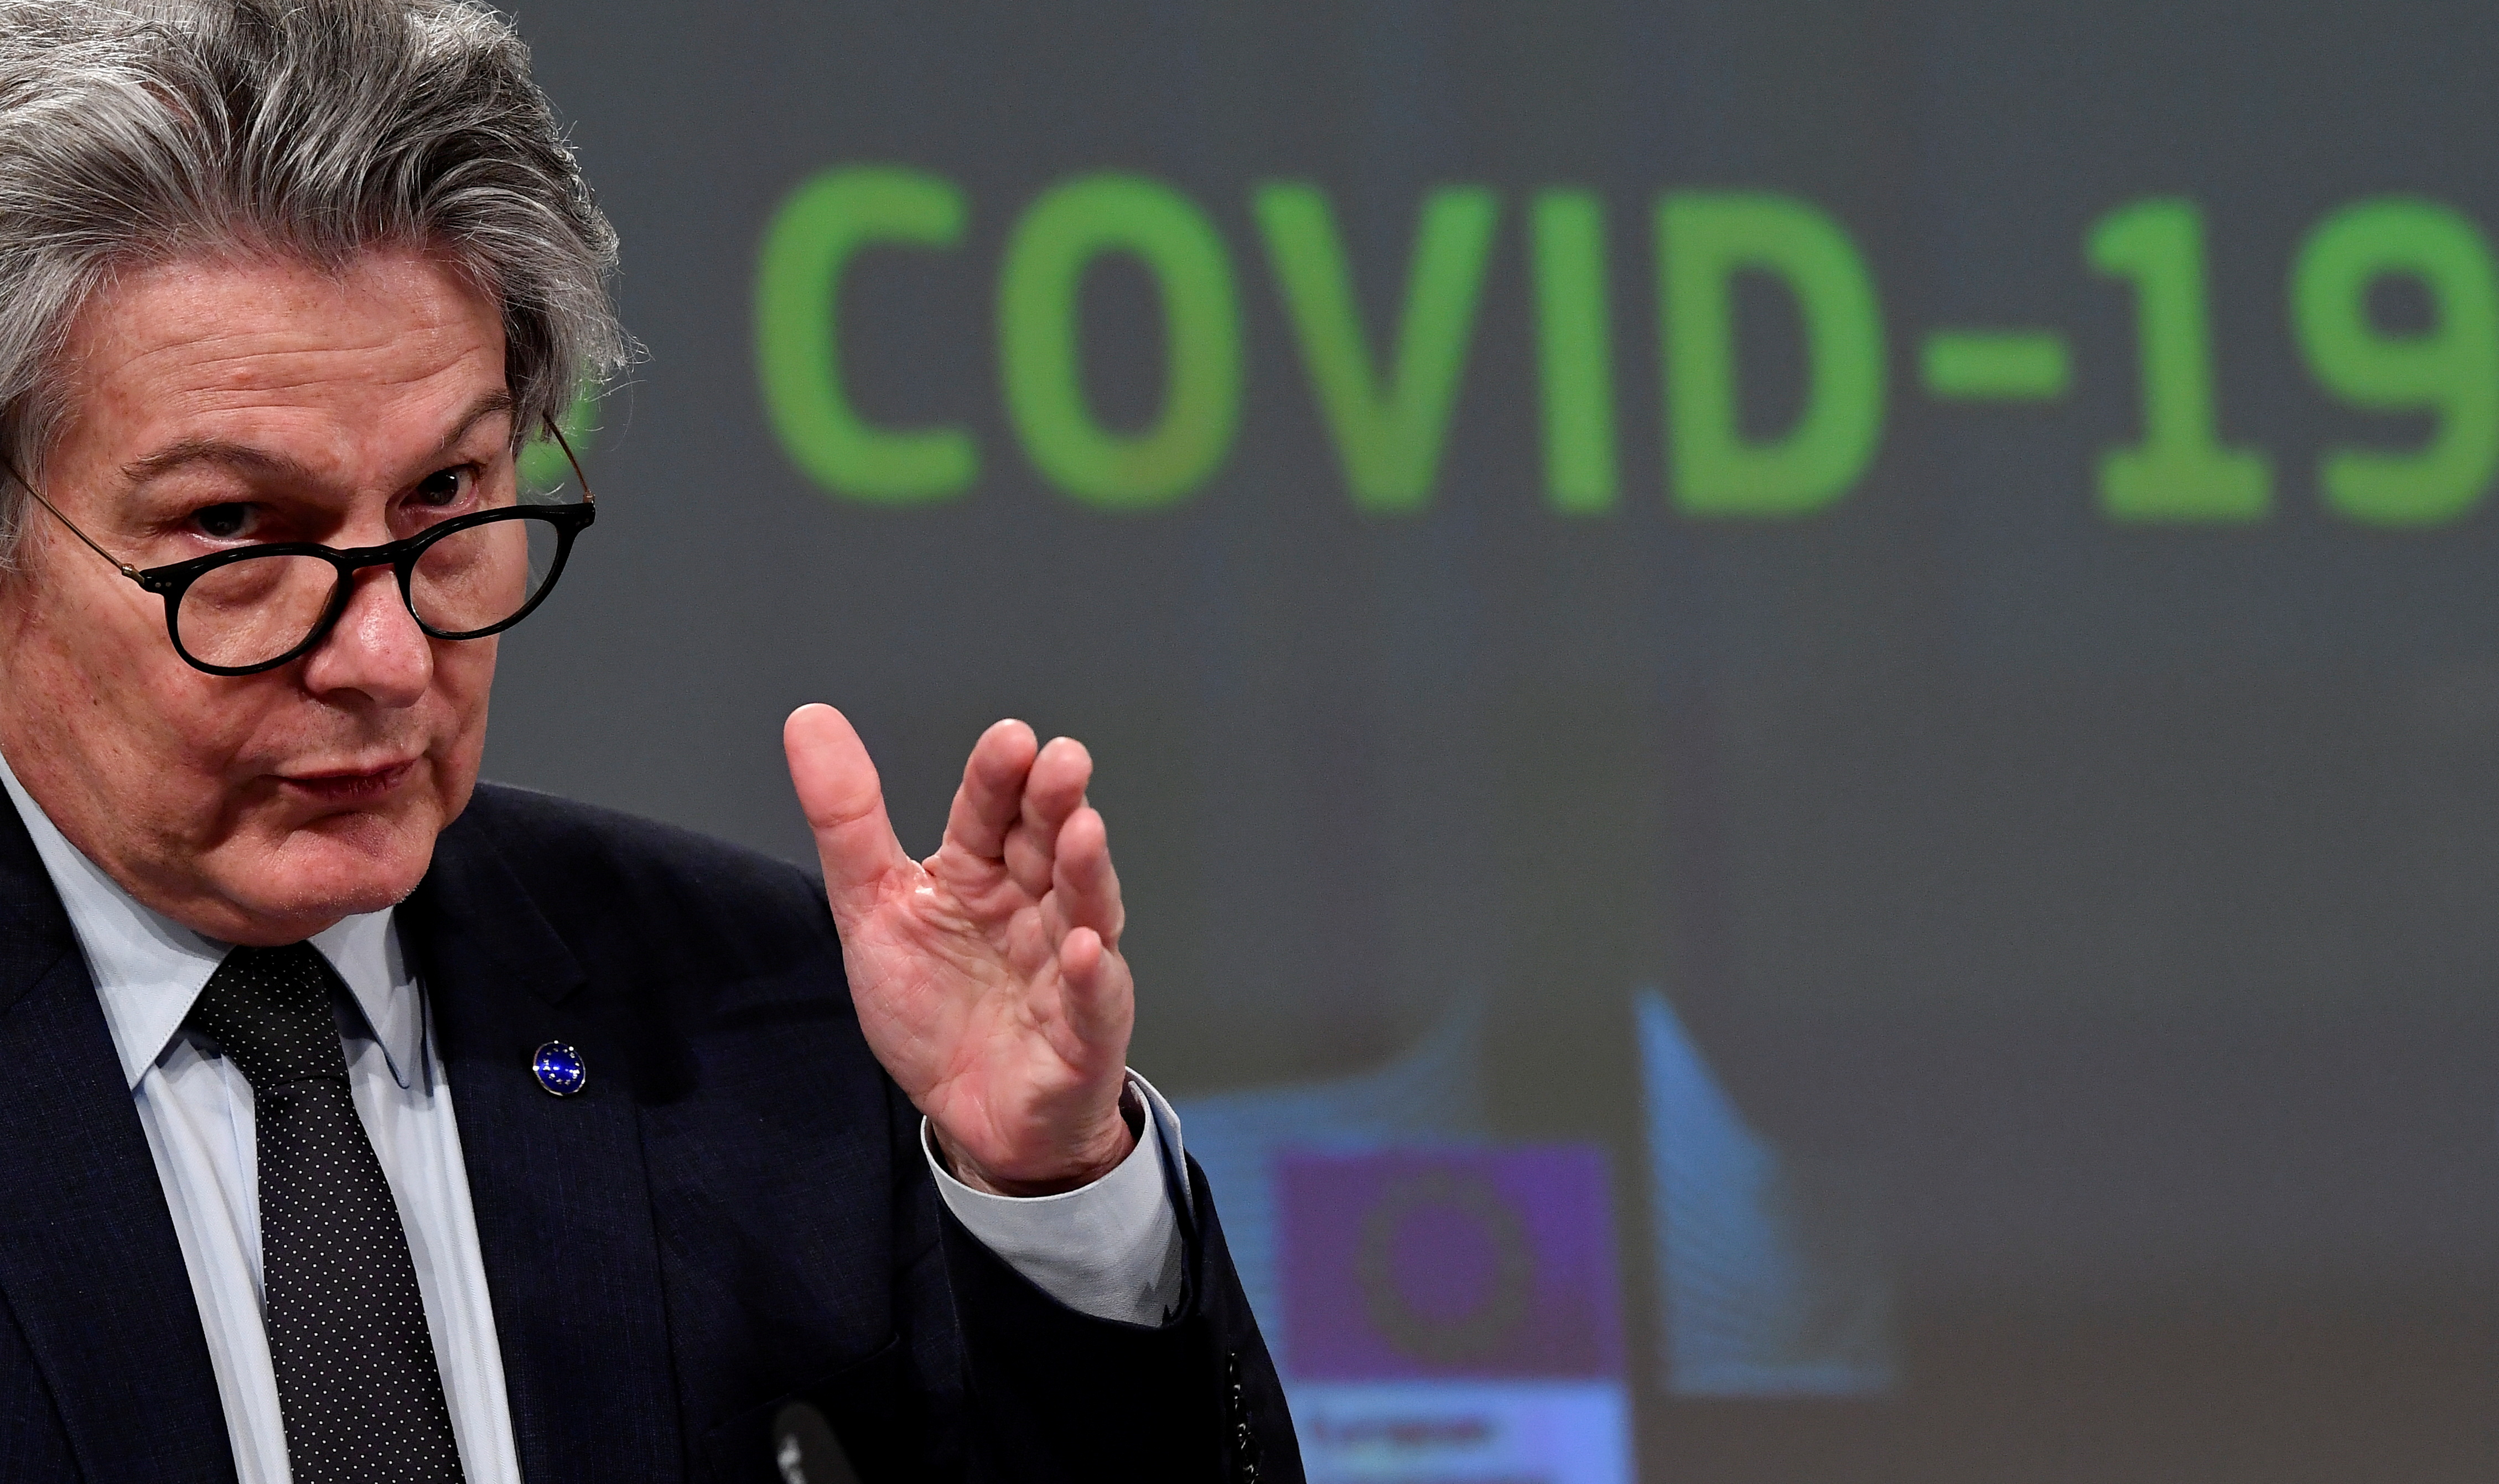 Thierry Breton, the EU commissioner for internal market and consumer protection, industry, research and energy, addresses a news conference in Brussels